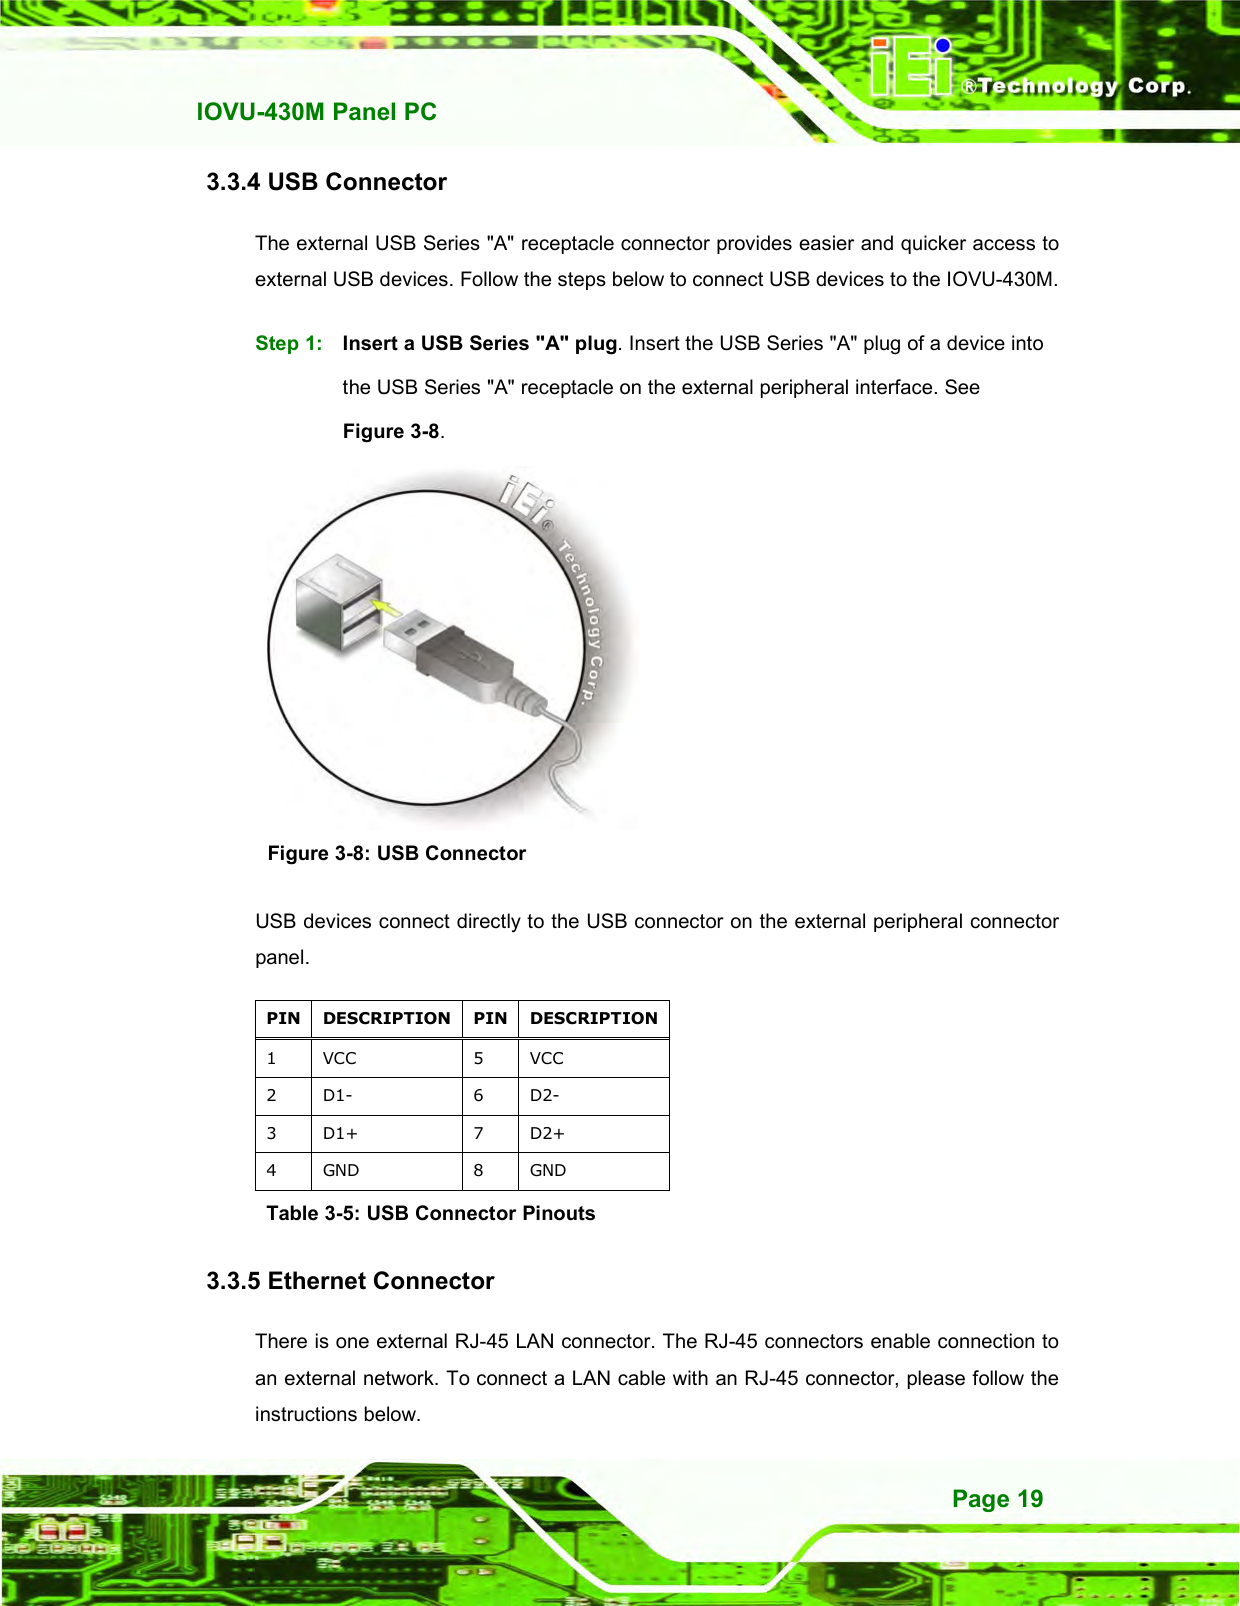   IOVU-430M Panel PC Page 19 3.3.4 USB Connector The external USB Series &quot;A&quot; receptacle connector provides easier and quicker access to external USB devices. Follow the steps below to connect USB devices to the IOVU-430M. Step 1:  Insert a USB Series &quot;A&quot; plug. Insert the USB Series &quot;A&quot; plug of a device into the USB Series &quot;A&quot; receptacle on the external peripheral interface. See Figure 3-8. Step 0:  Figure 3-8: USB Connector USB devices connect directly to the USB connector on the external peripheral connector panel. PIN DESCRIPTION PIN DESCRIPTION 1  VCC  5  VCC 2  D1-  6  D2- 3  D1+  7  D2+ 4  GND  8  GND Table 3-5: USB Connector Pinouts 3.3.5 Ethernet Connector There is one external RJ-45 LAN connector. The RJ-45 connectors enable connection to an external network. To connect a LAN cable with an RJ-45 connector, please follow the instructions below. 